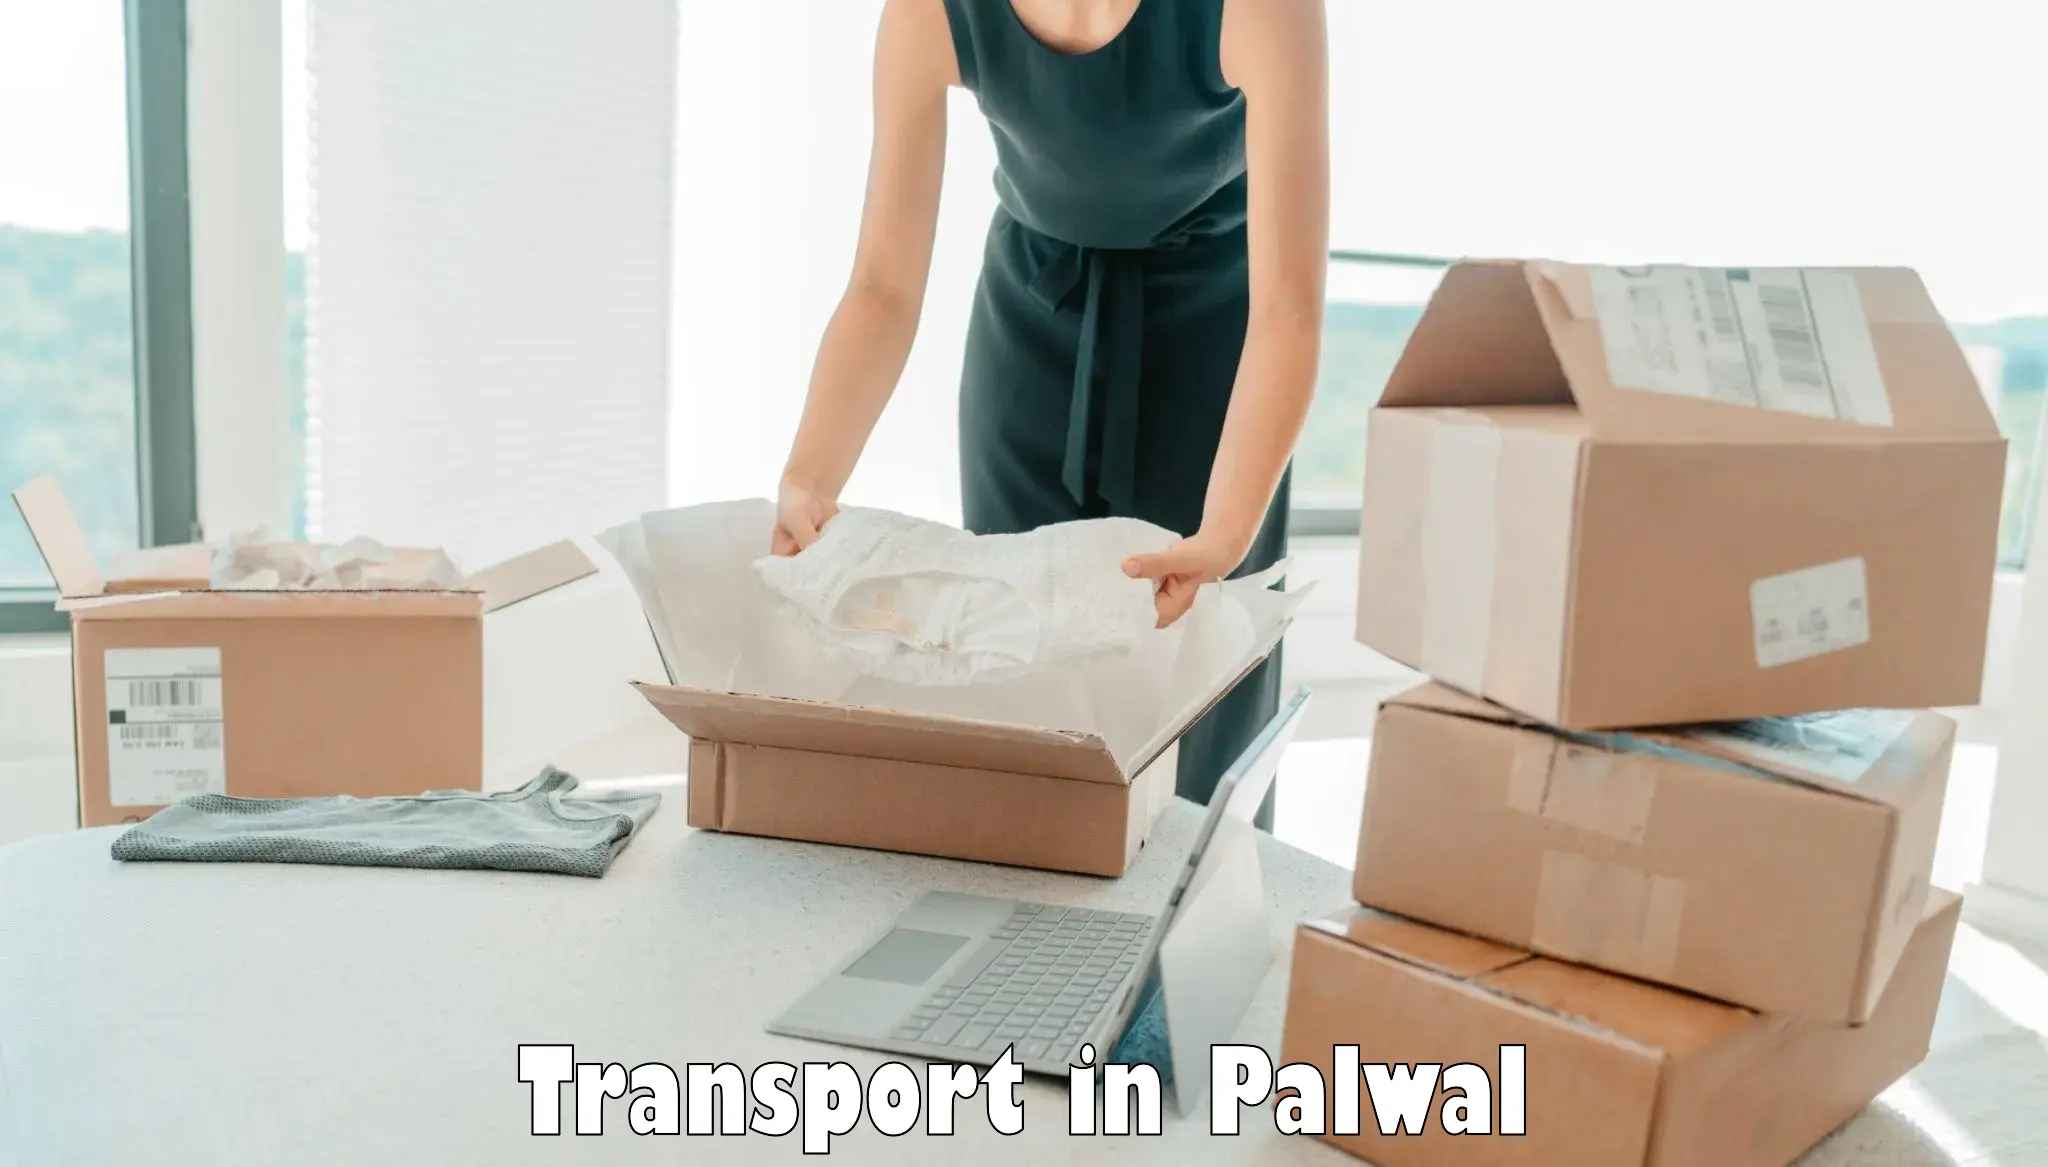 Furniture transport service in Palwal